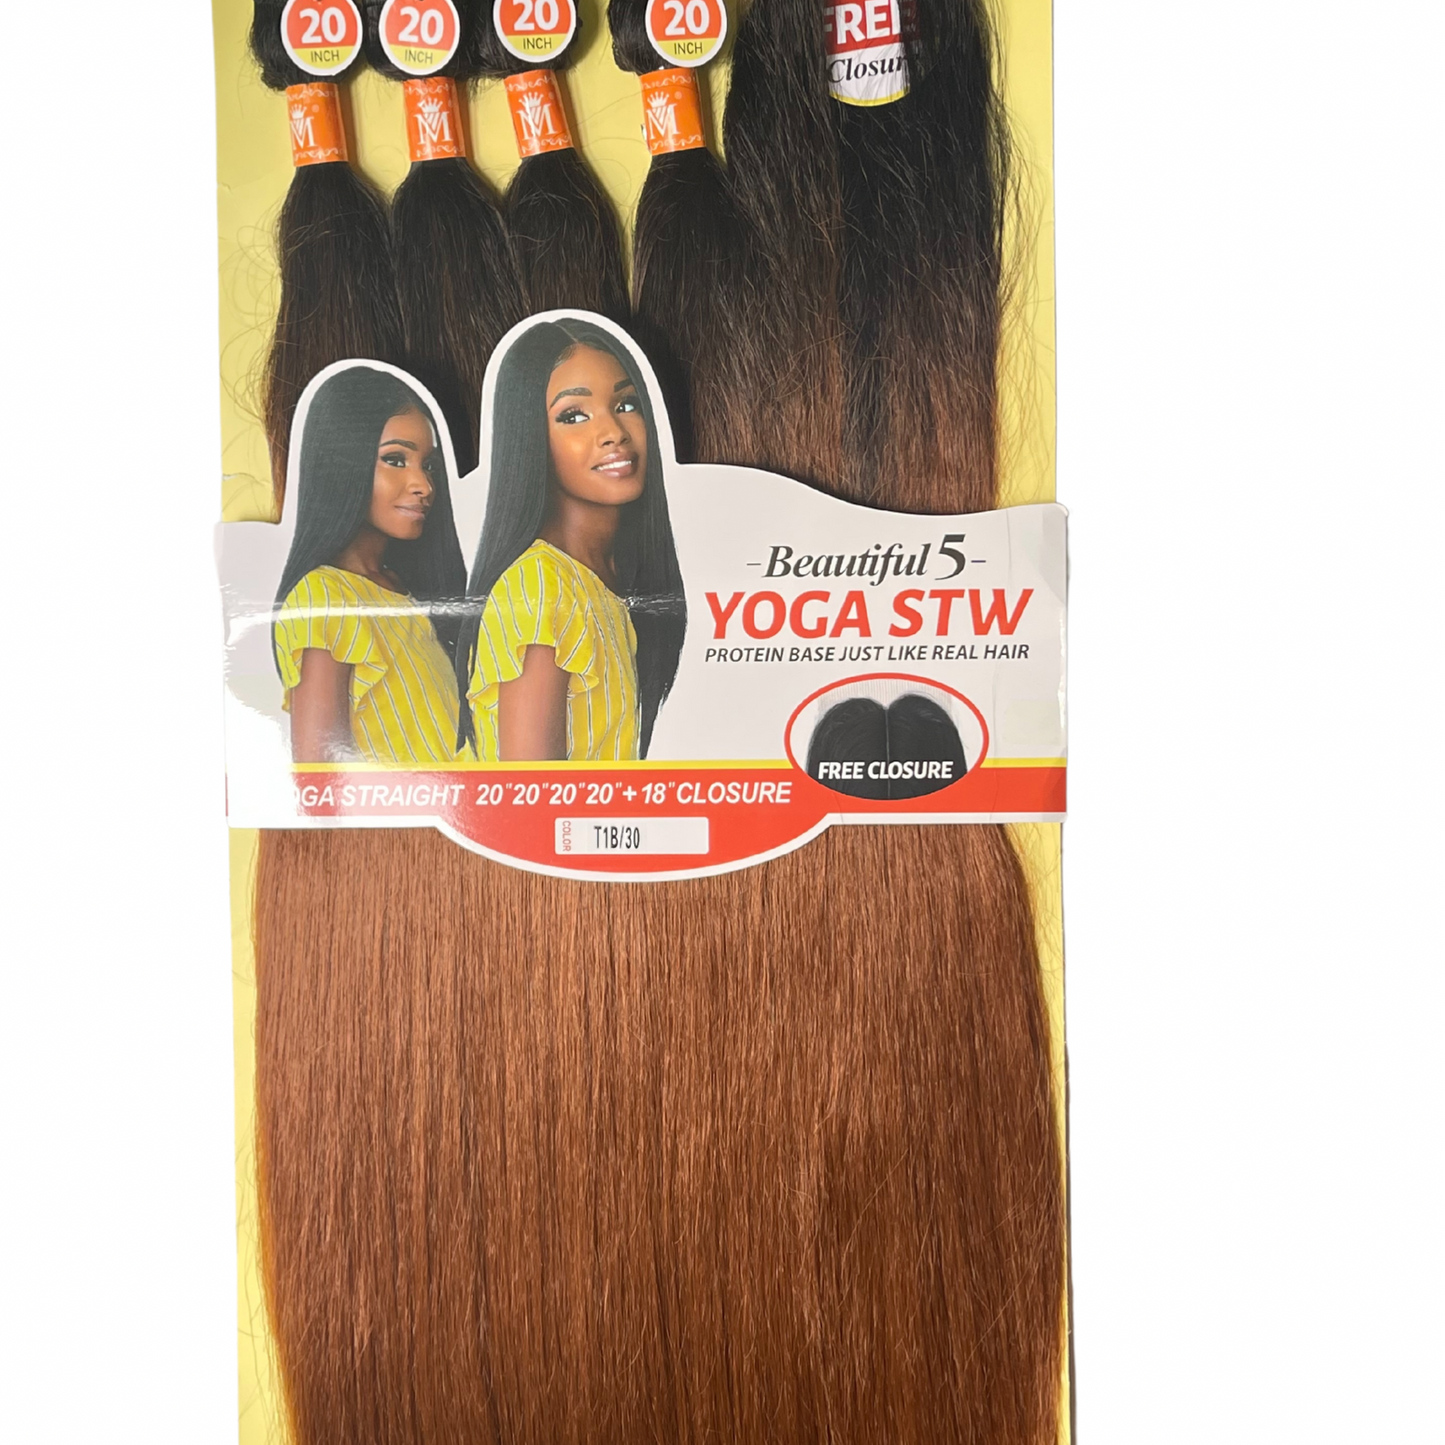 Yoga Straight Protein Base synthetic hair